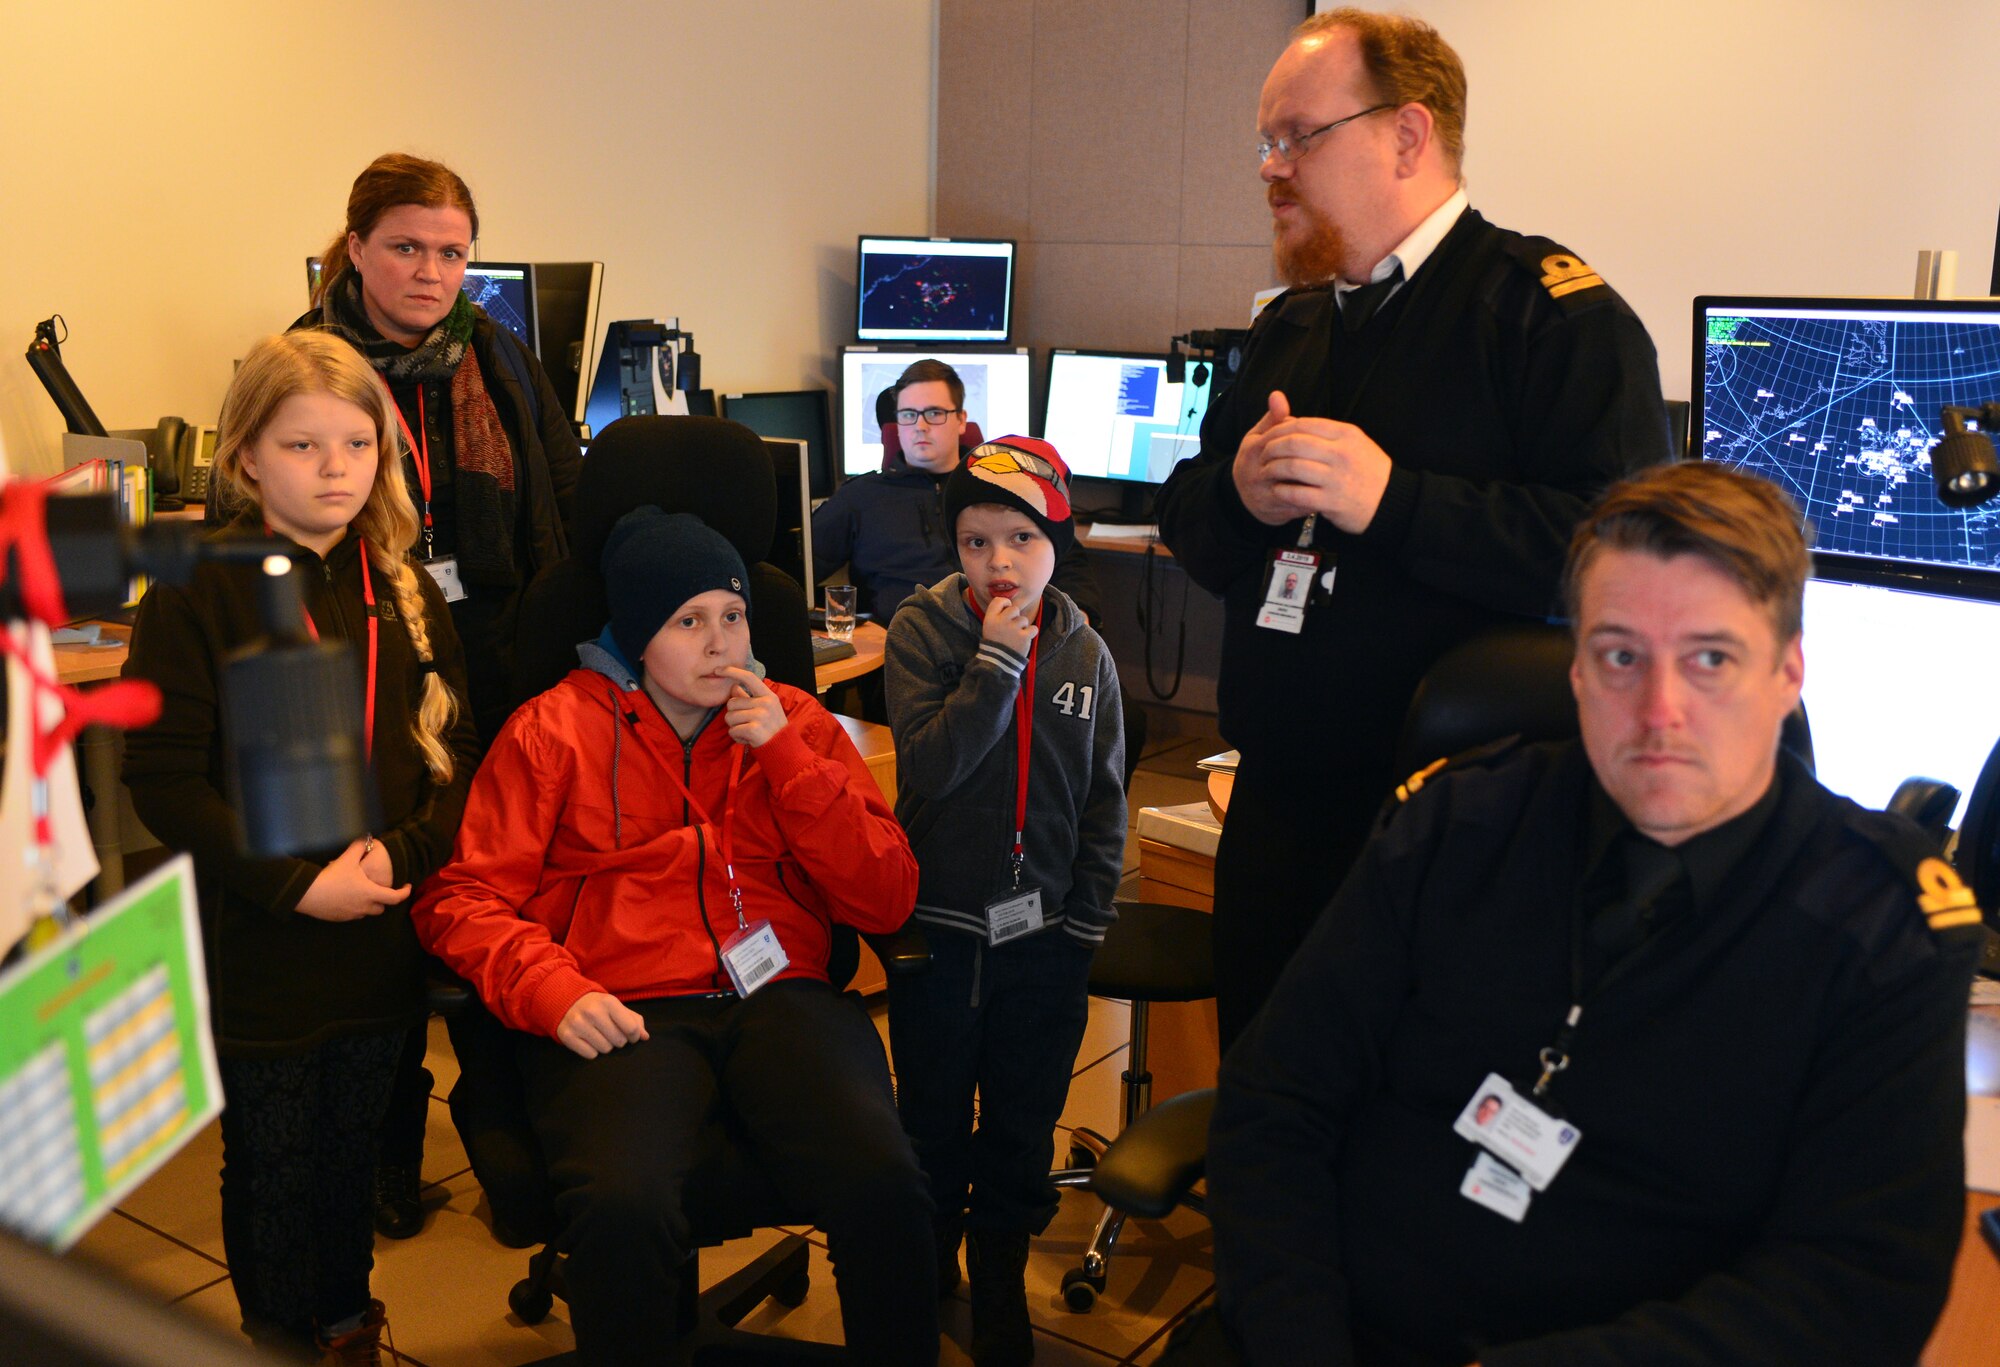 Gunnar Guðlaugsson, Arna Tryggvadóttir and their families listen to briefings by Icelandic Coast Guard and U.S. Air Force personnel at the Control and Reporting Center during the 871st Air Expeditionary Squadron Pilot for a Day program at Keflavik International Airport, Iceland, May 13, 2015. As part of the program, both children toured the CRC and participated in a simulated mission. (U.S. Air Force photo by 2nd Lt. Meredith Mulvihill/Released)